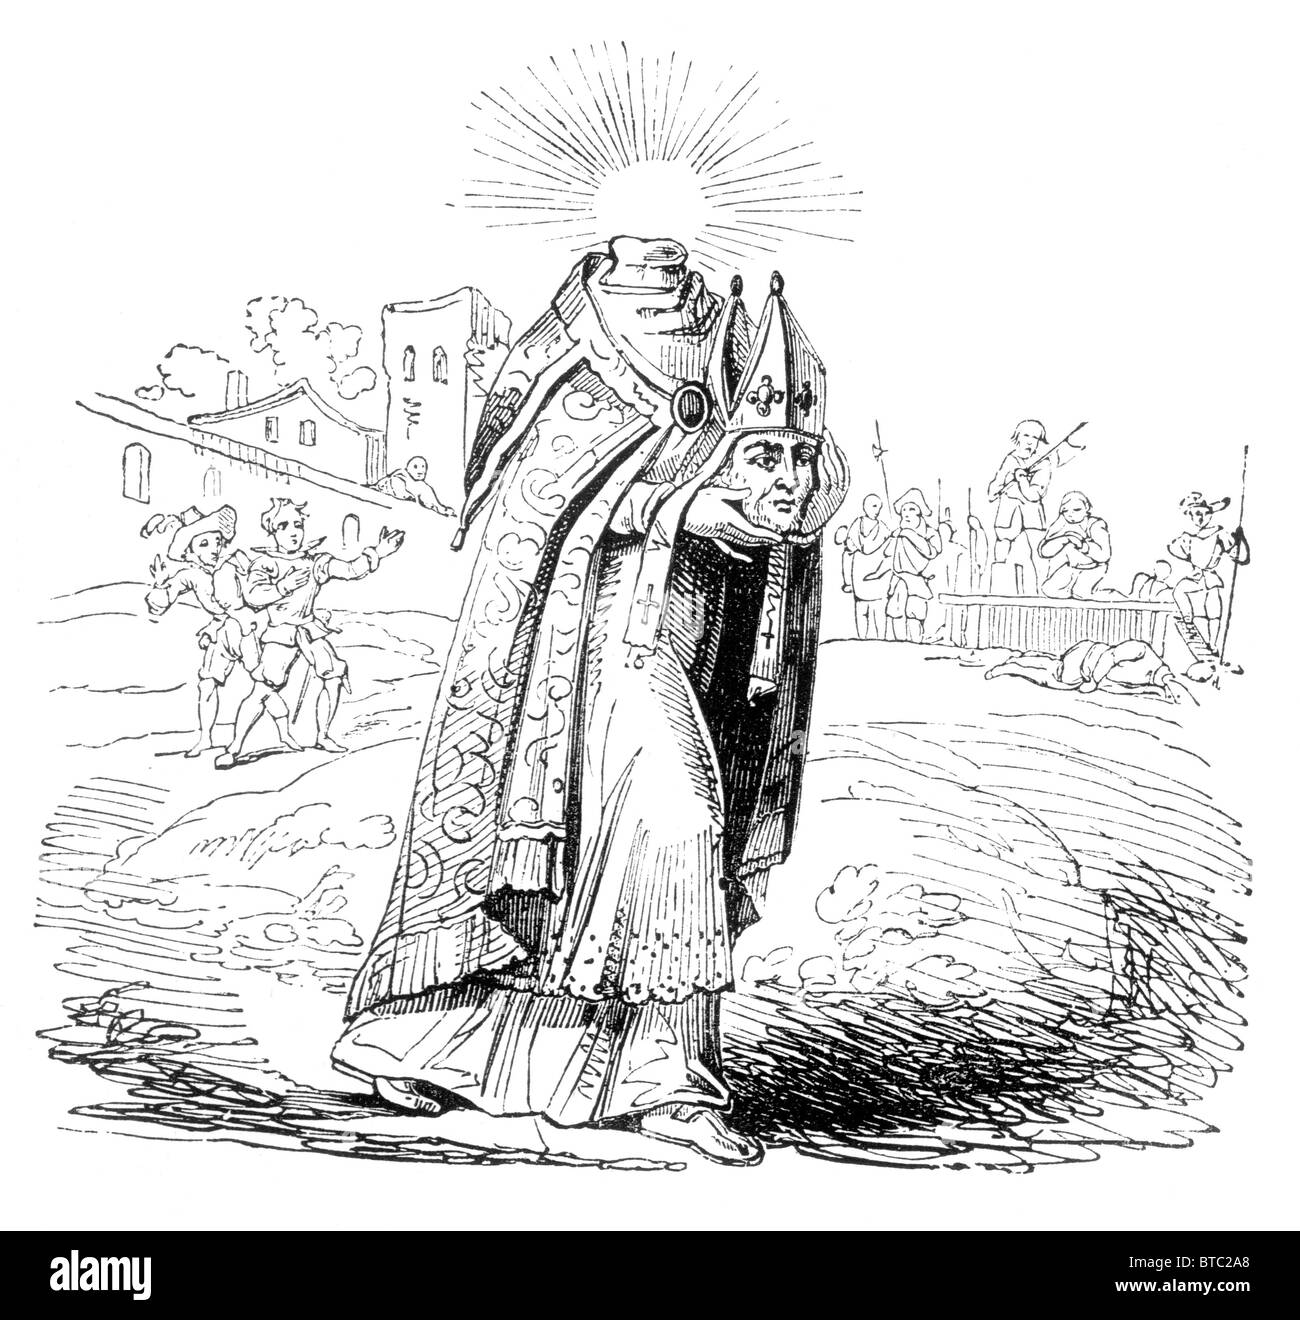 St Denys carrying his severed head; Black and White Illustration from William Hone's Everyday Book Stock Photo